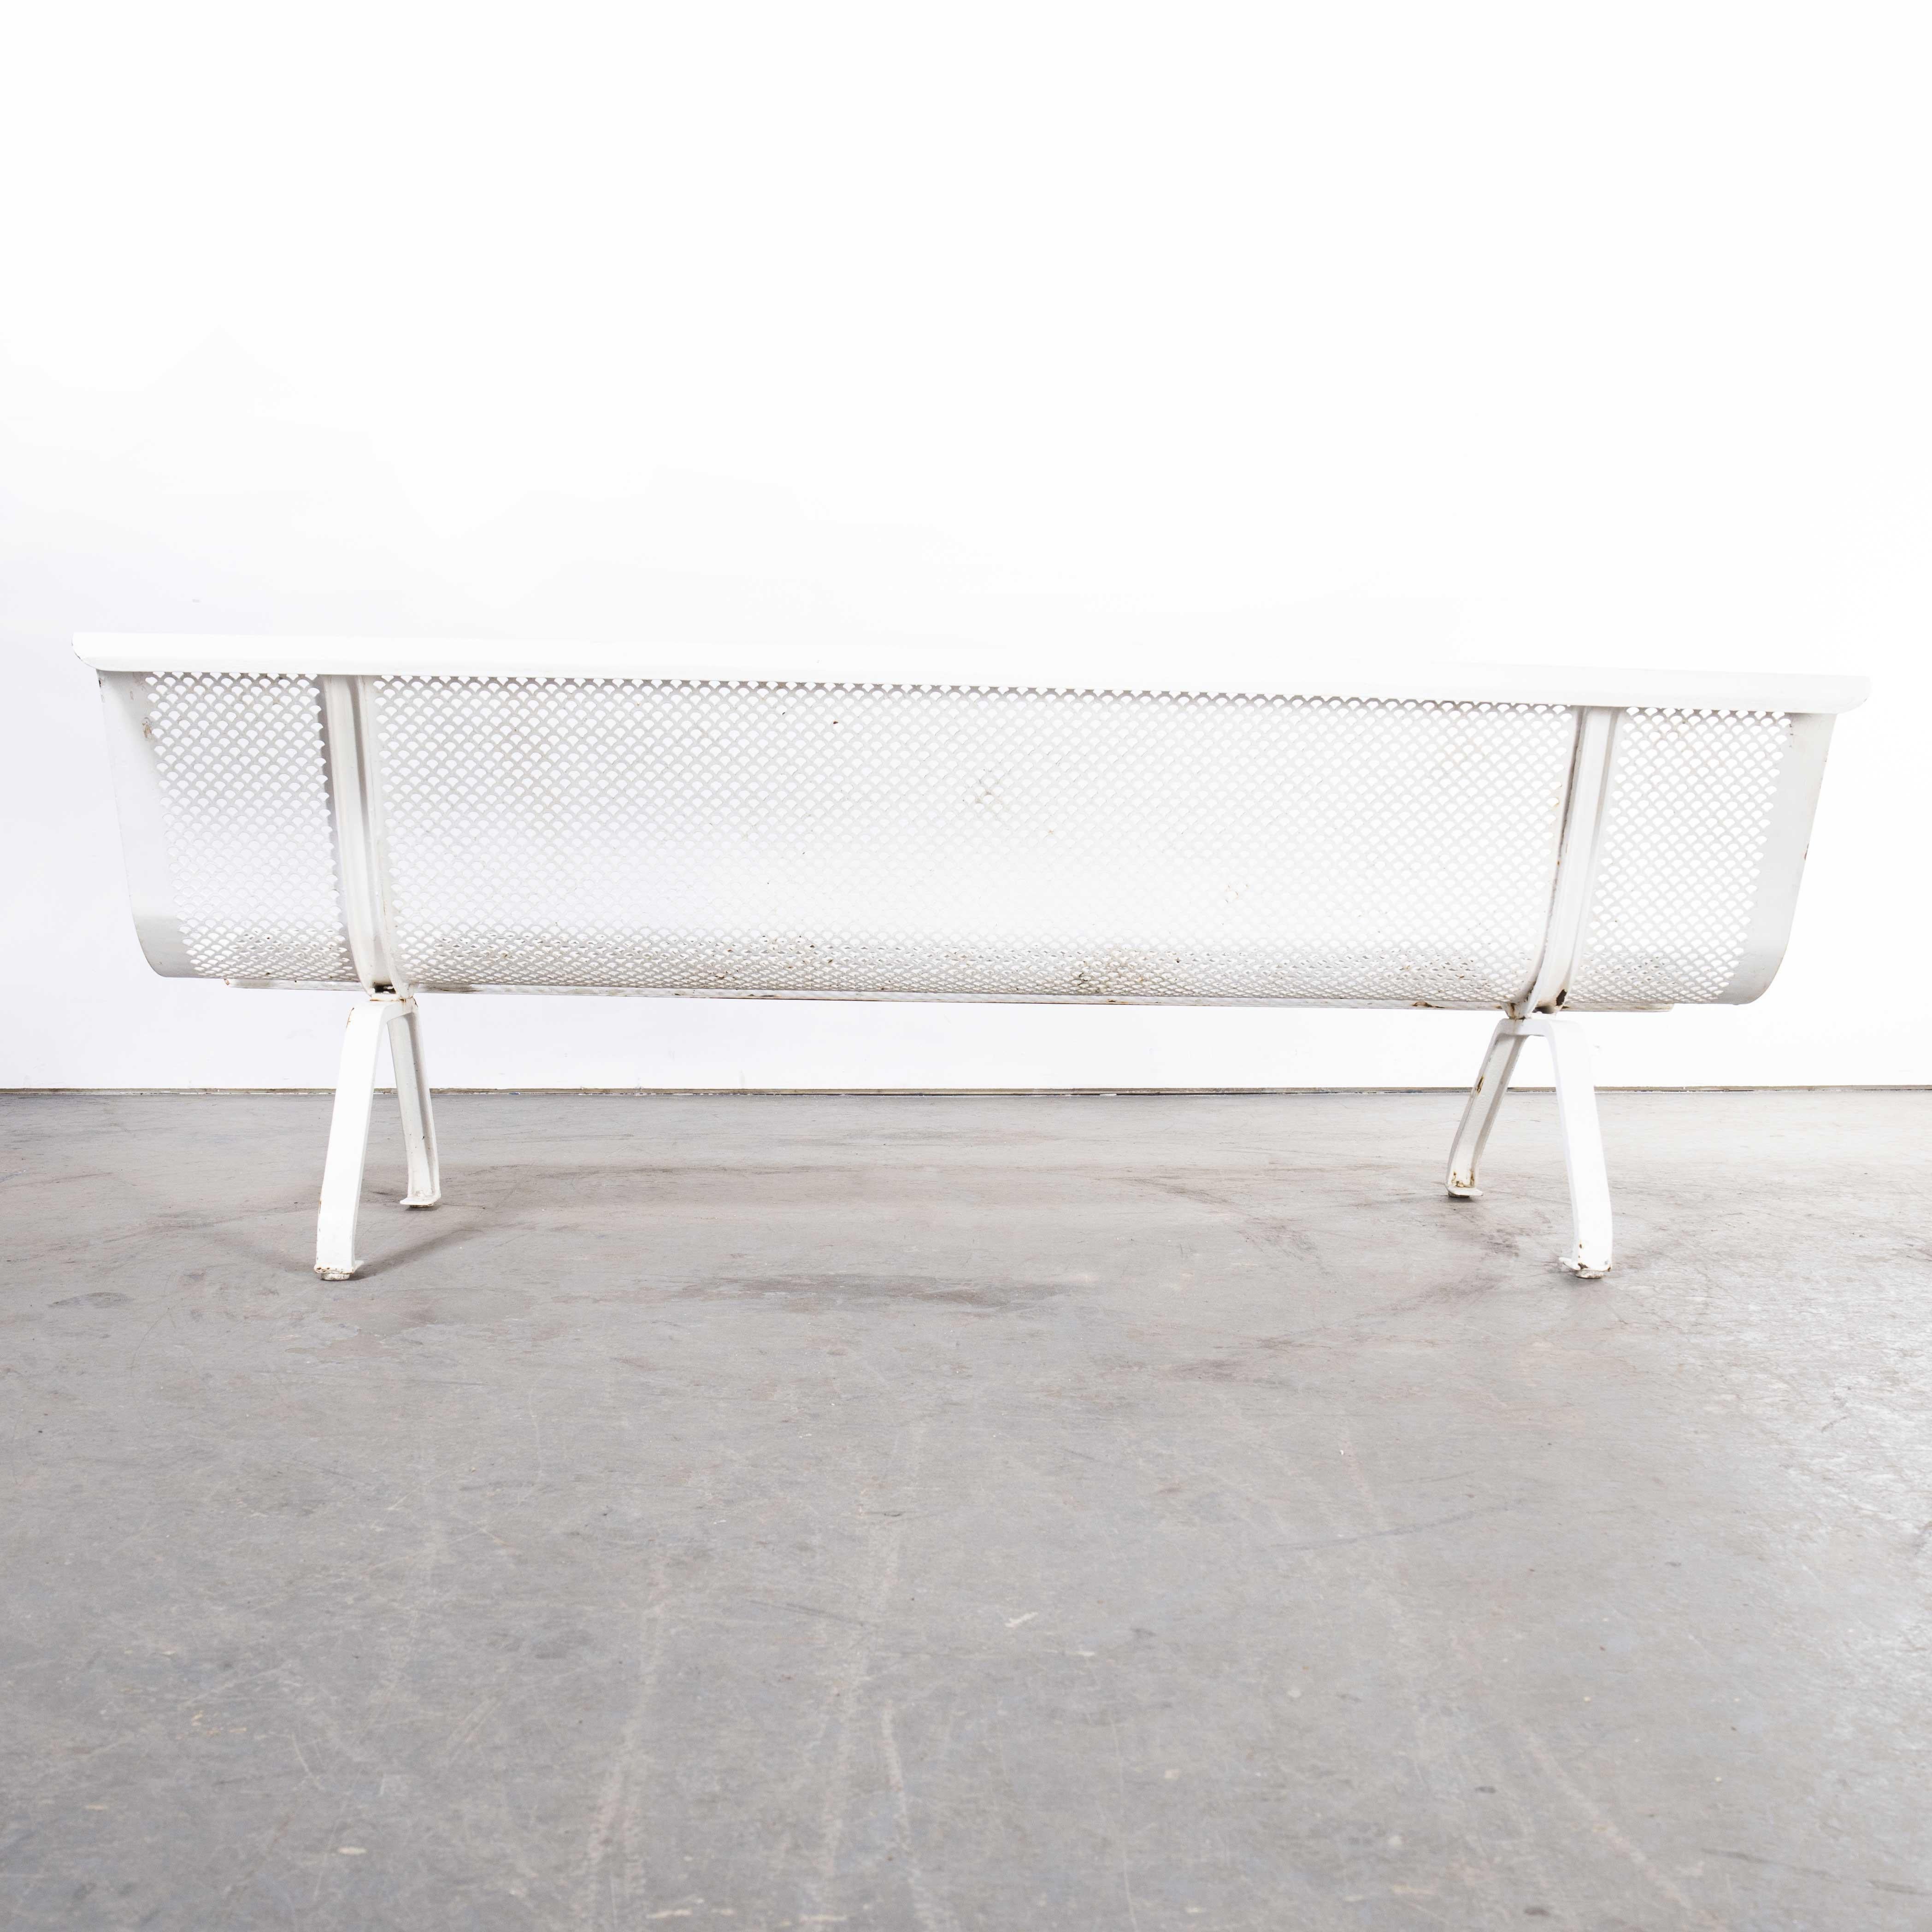 1960's French White Perforated Steel Outdoor Bench For Sale 3